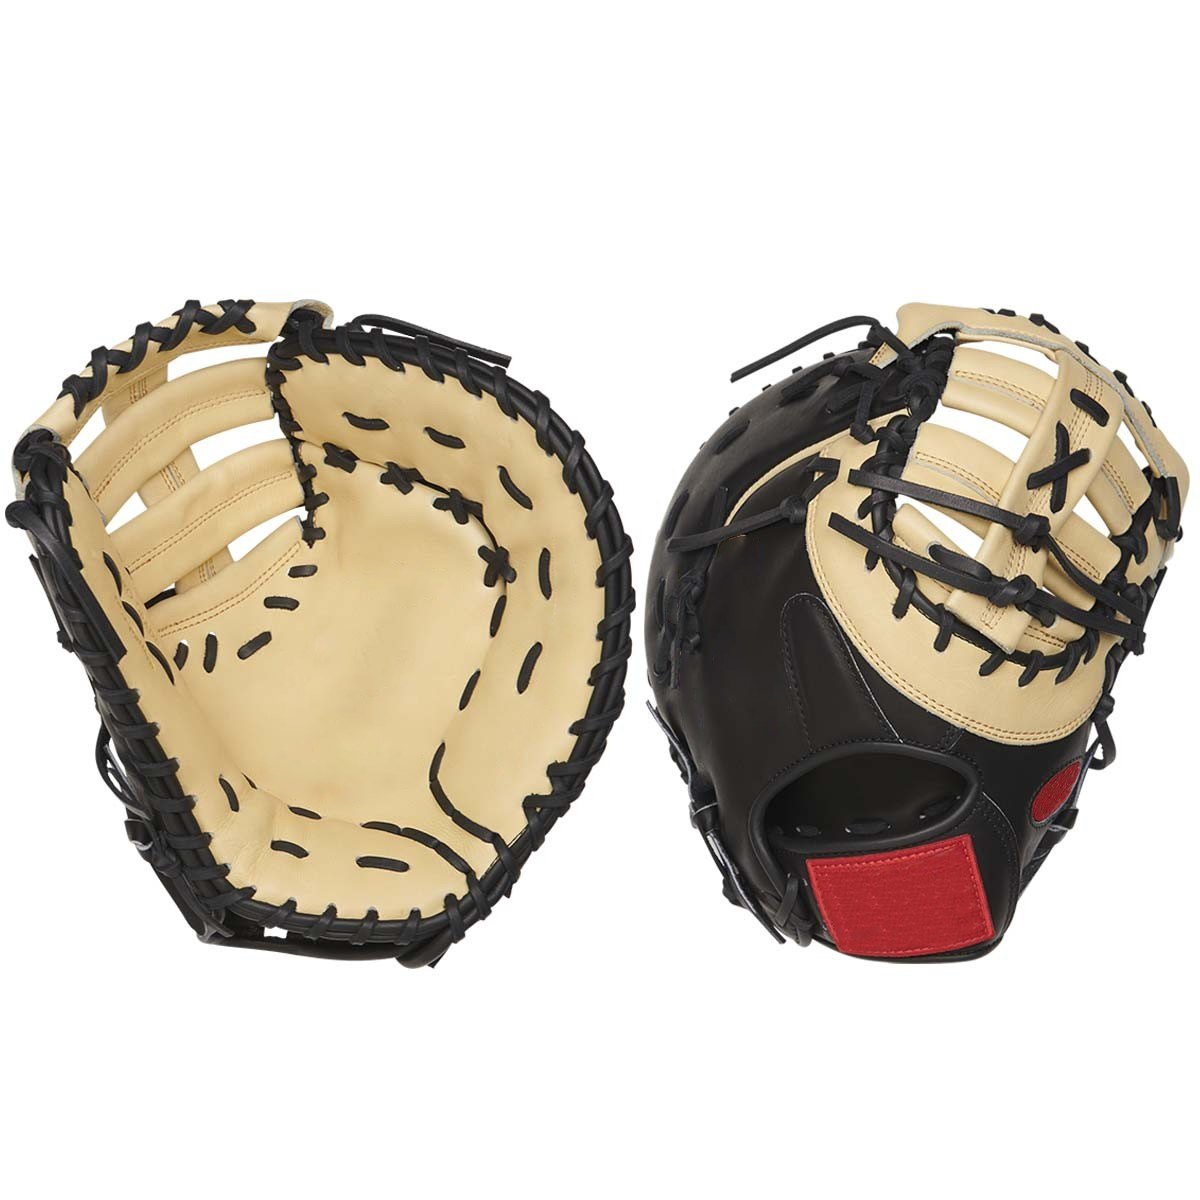 11.5" Cowhide leather durable first base baseball gloves